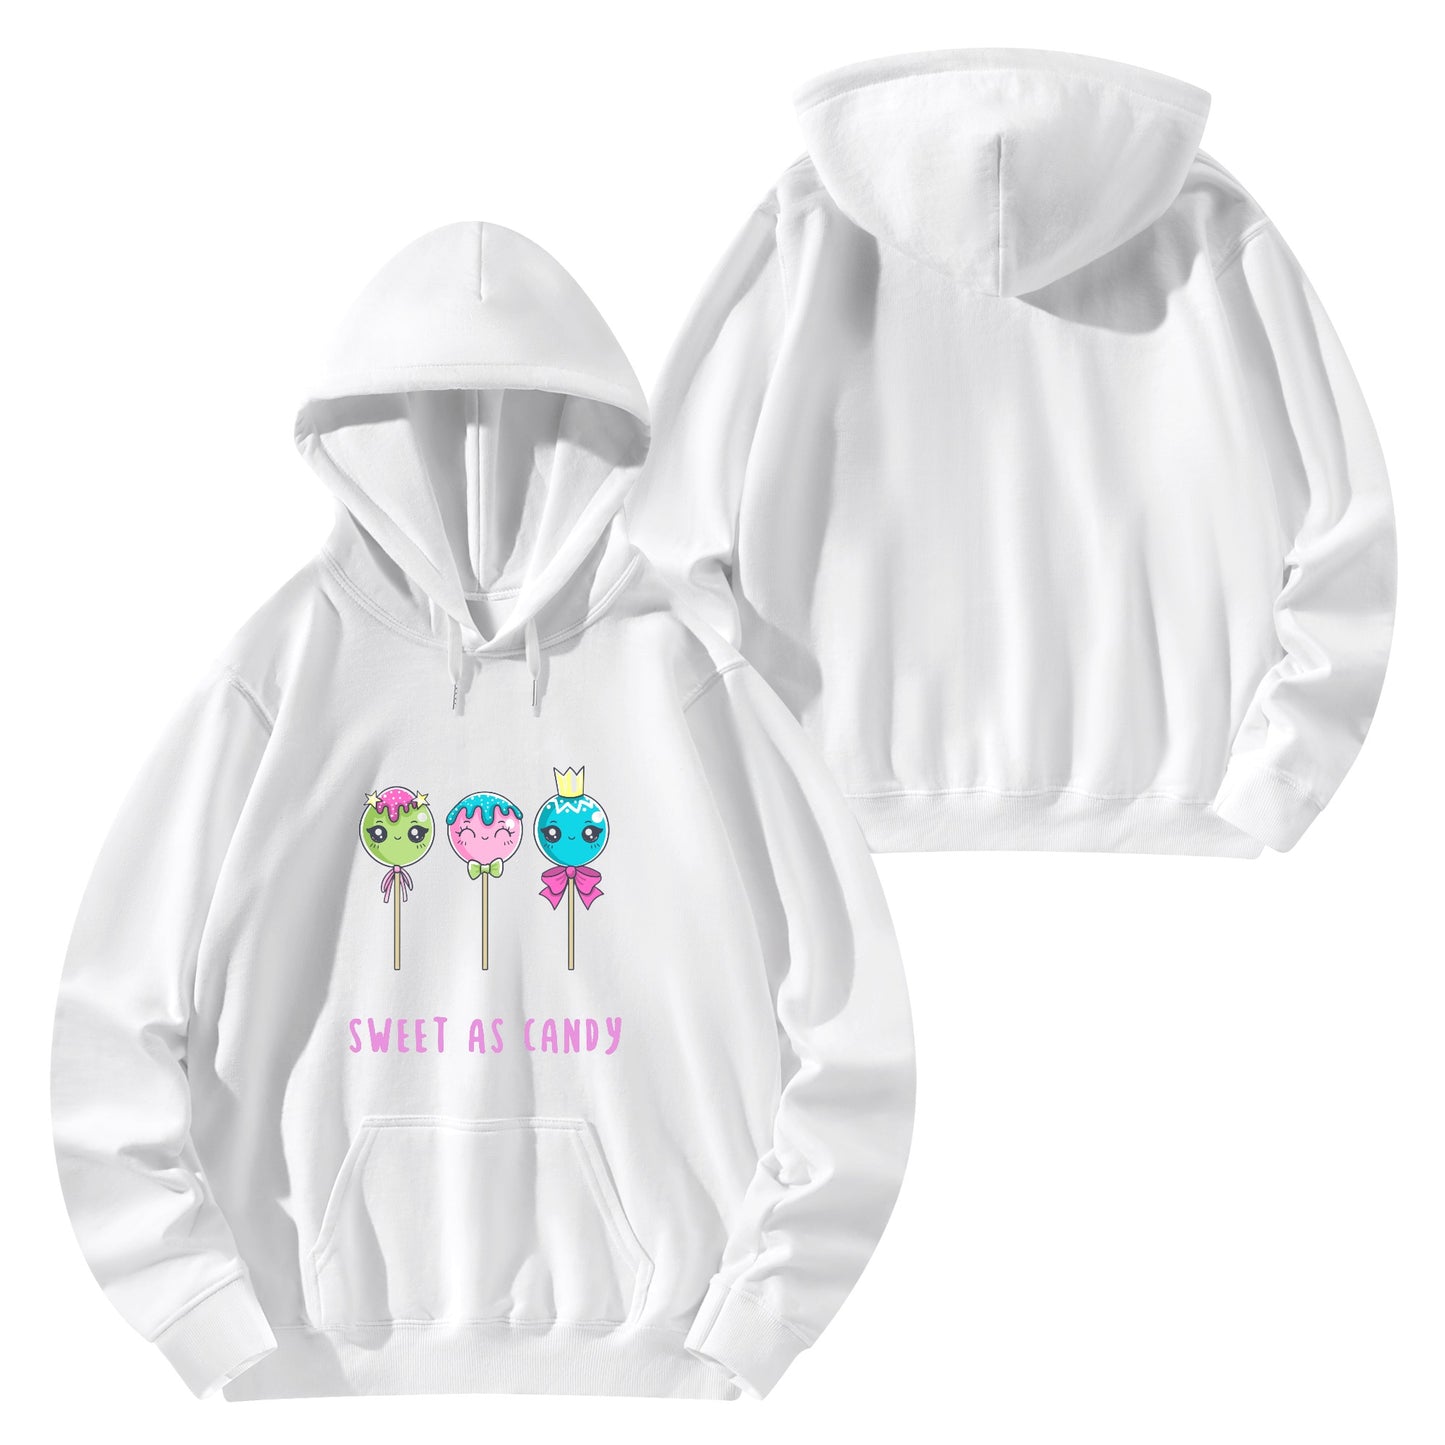 "Sweet as Candy" Adult Cotton Hoodie